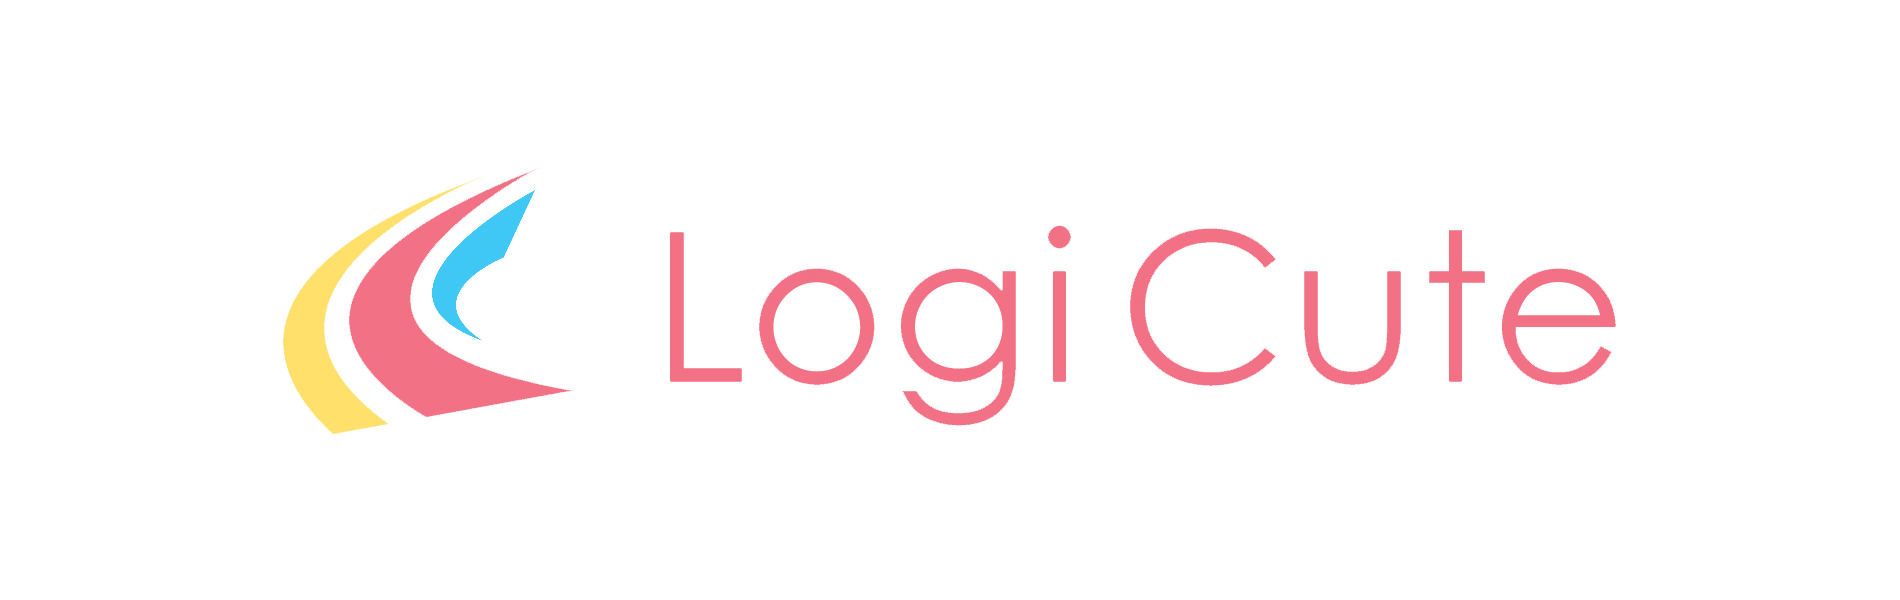 Welcome to Our team - Logicute